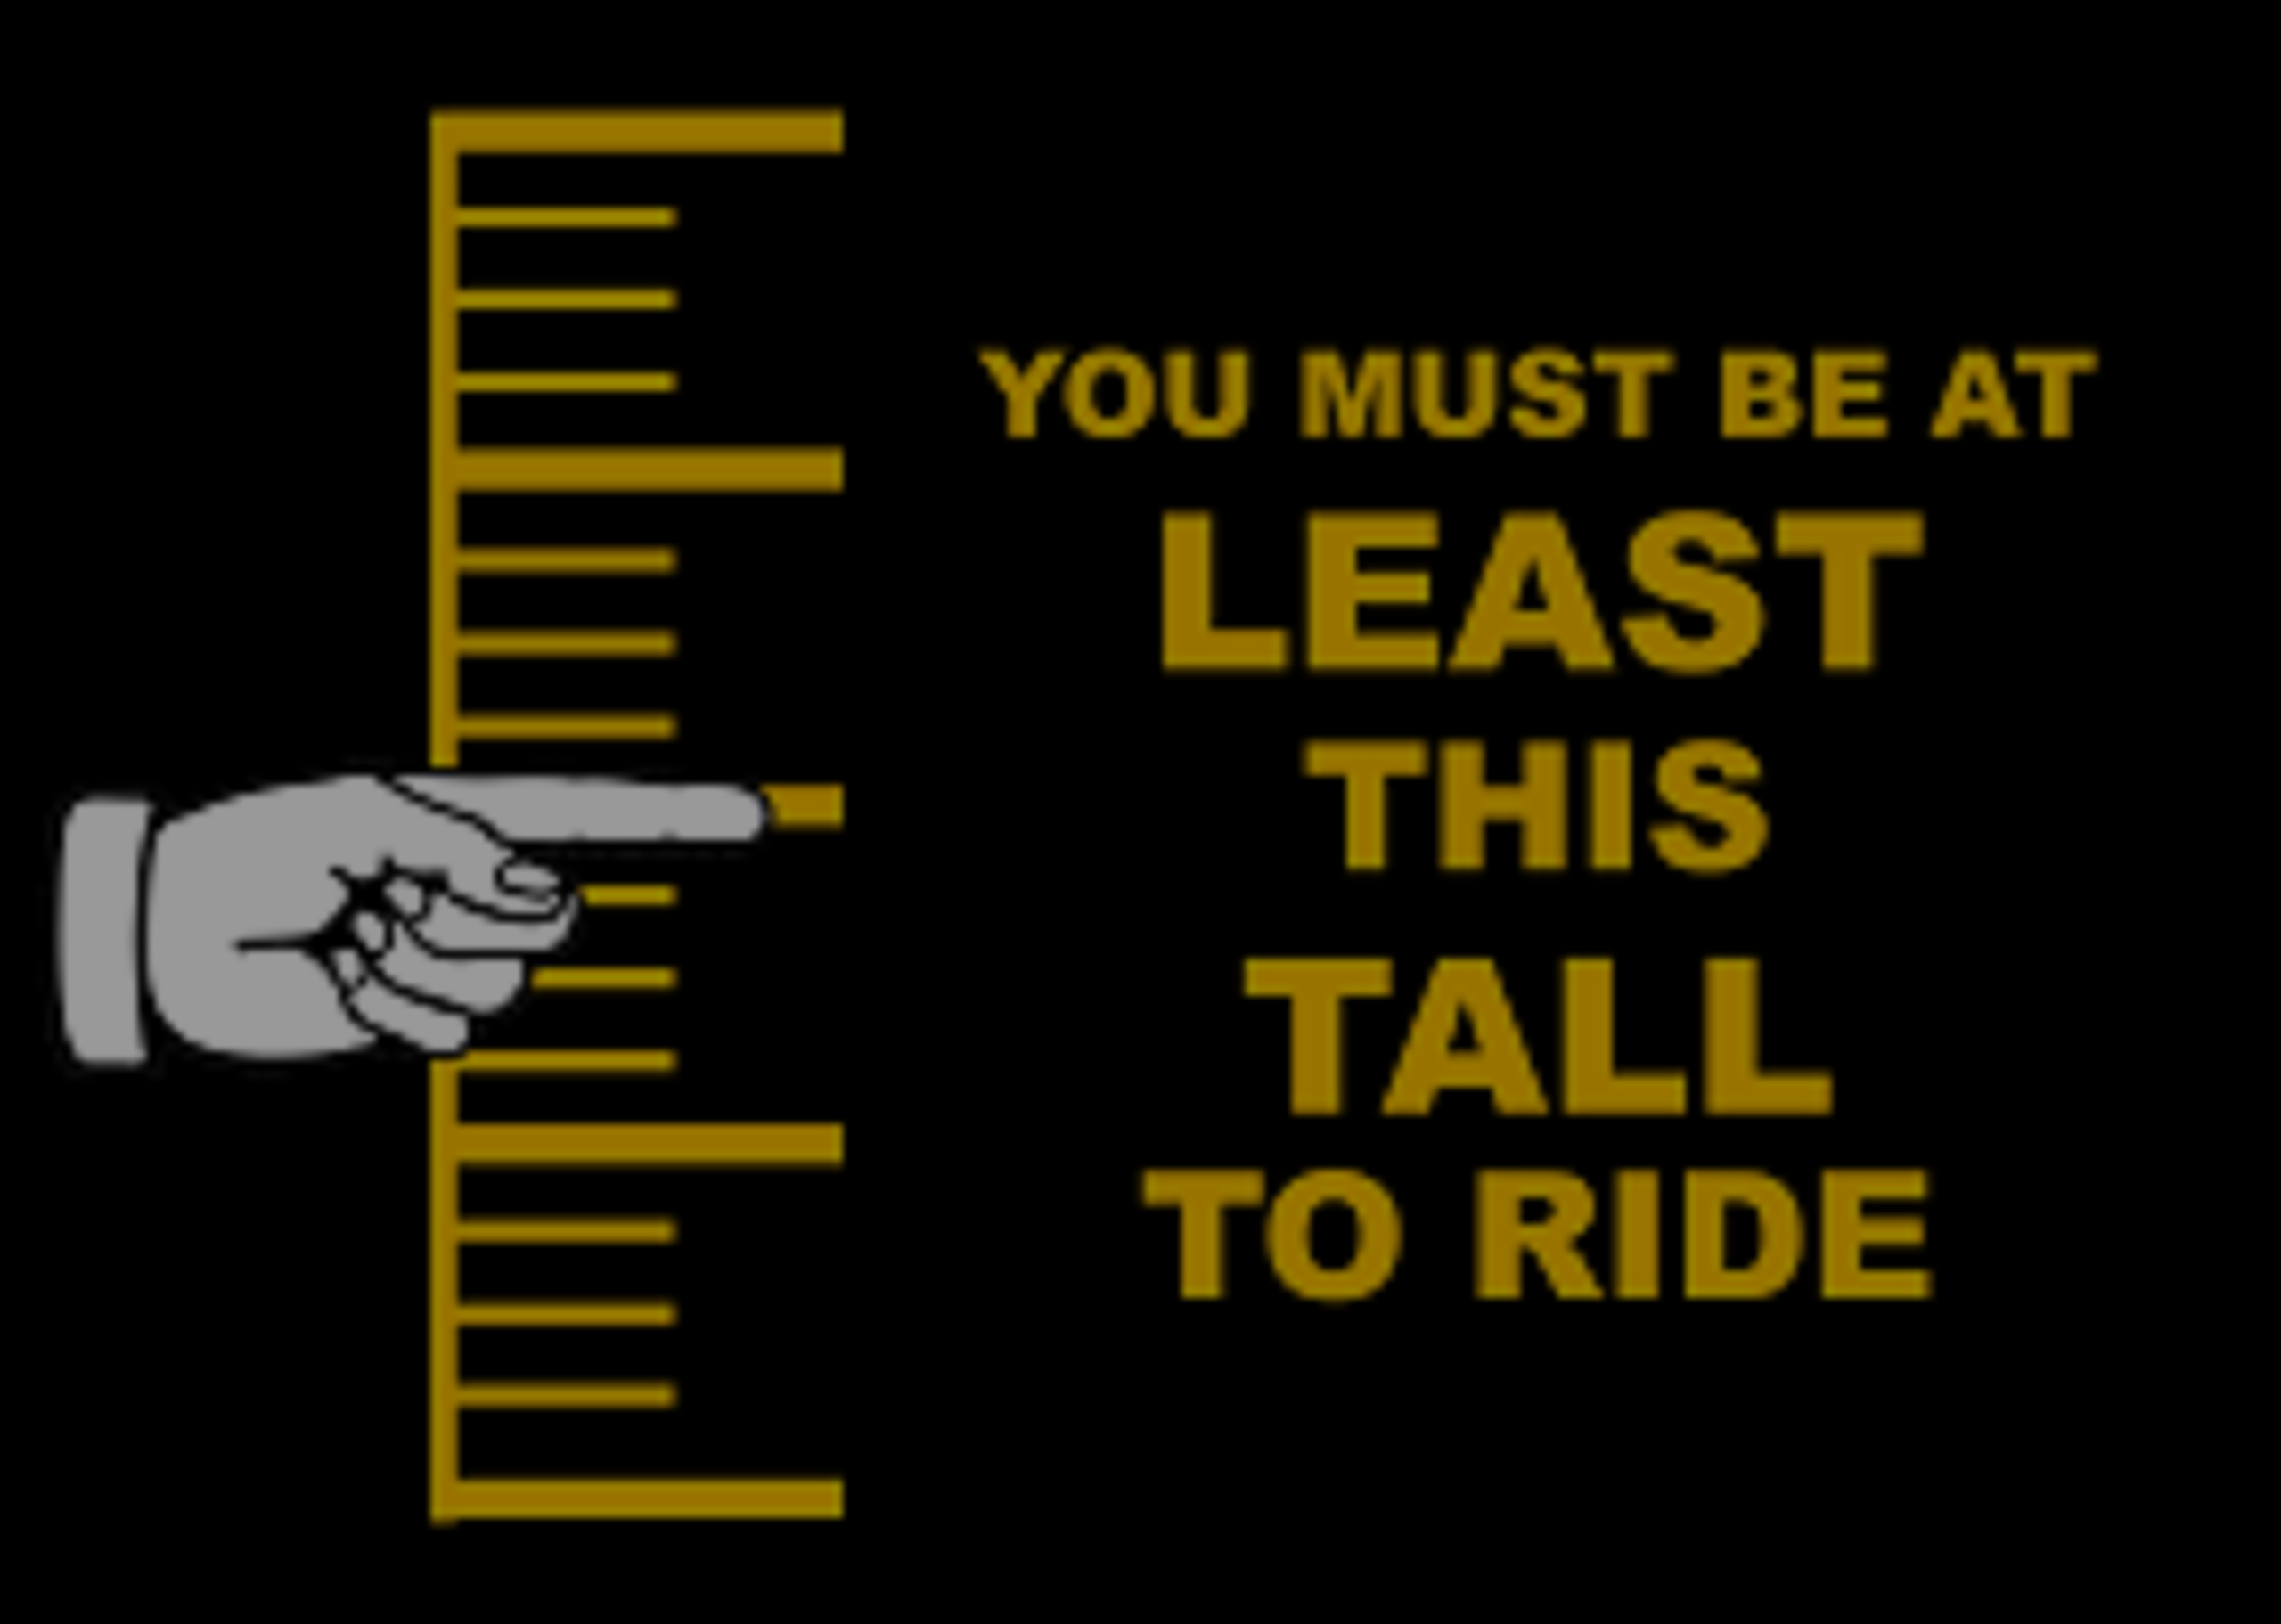 You must go home. Must be this Tall to Ride. You must be this Tall to. Height limit знак. Must be.